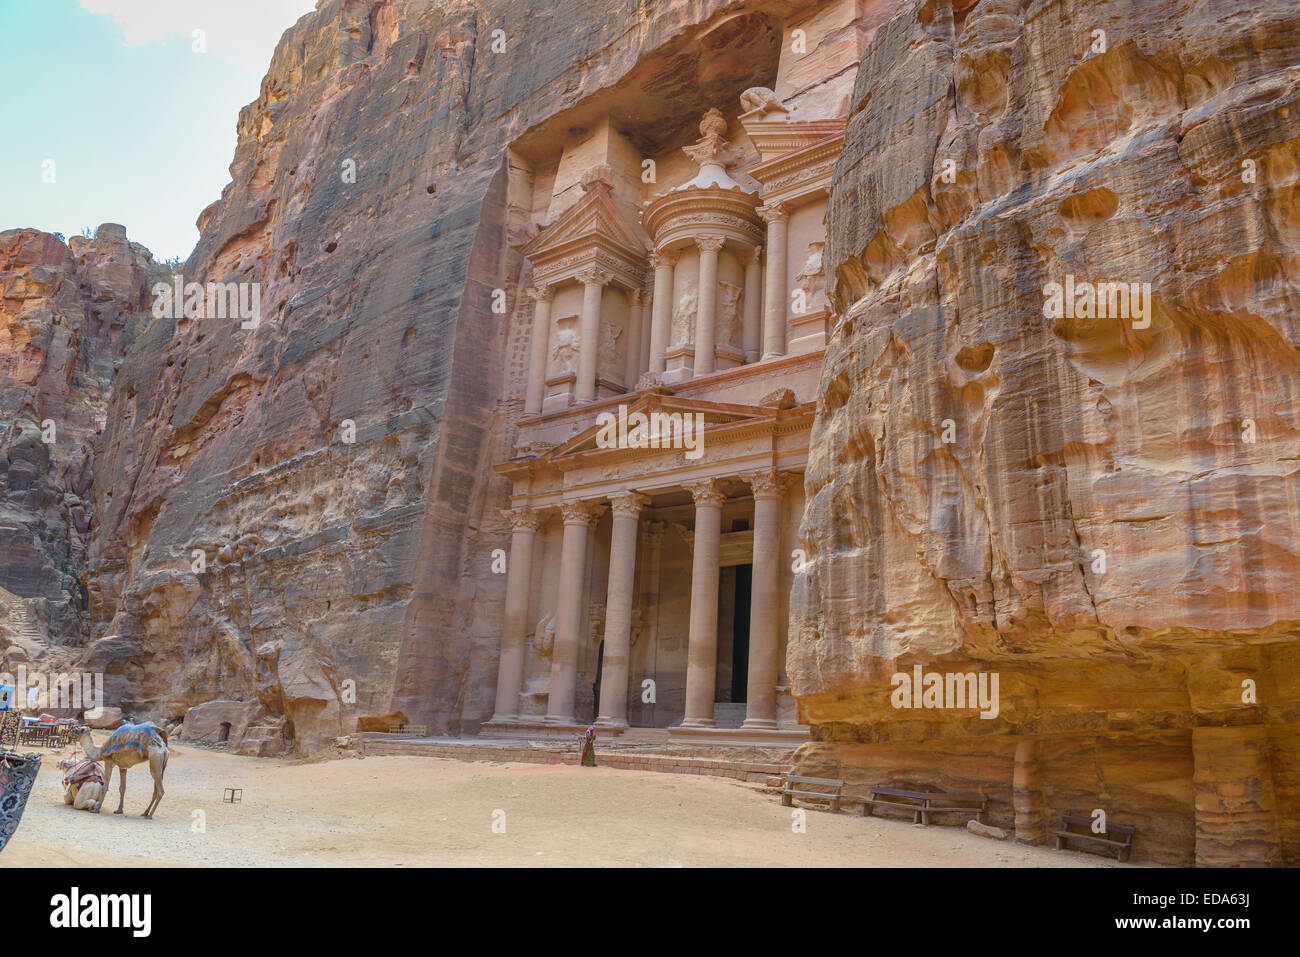 The Treasury in the  Ancient city of Petra carved out of the rock, Jordan Stock Photo